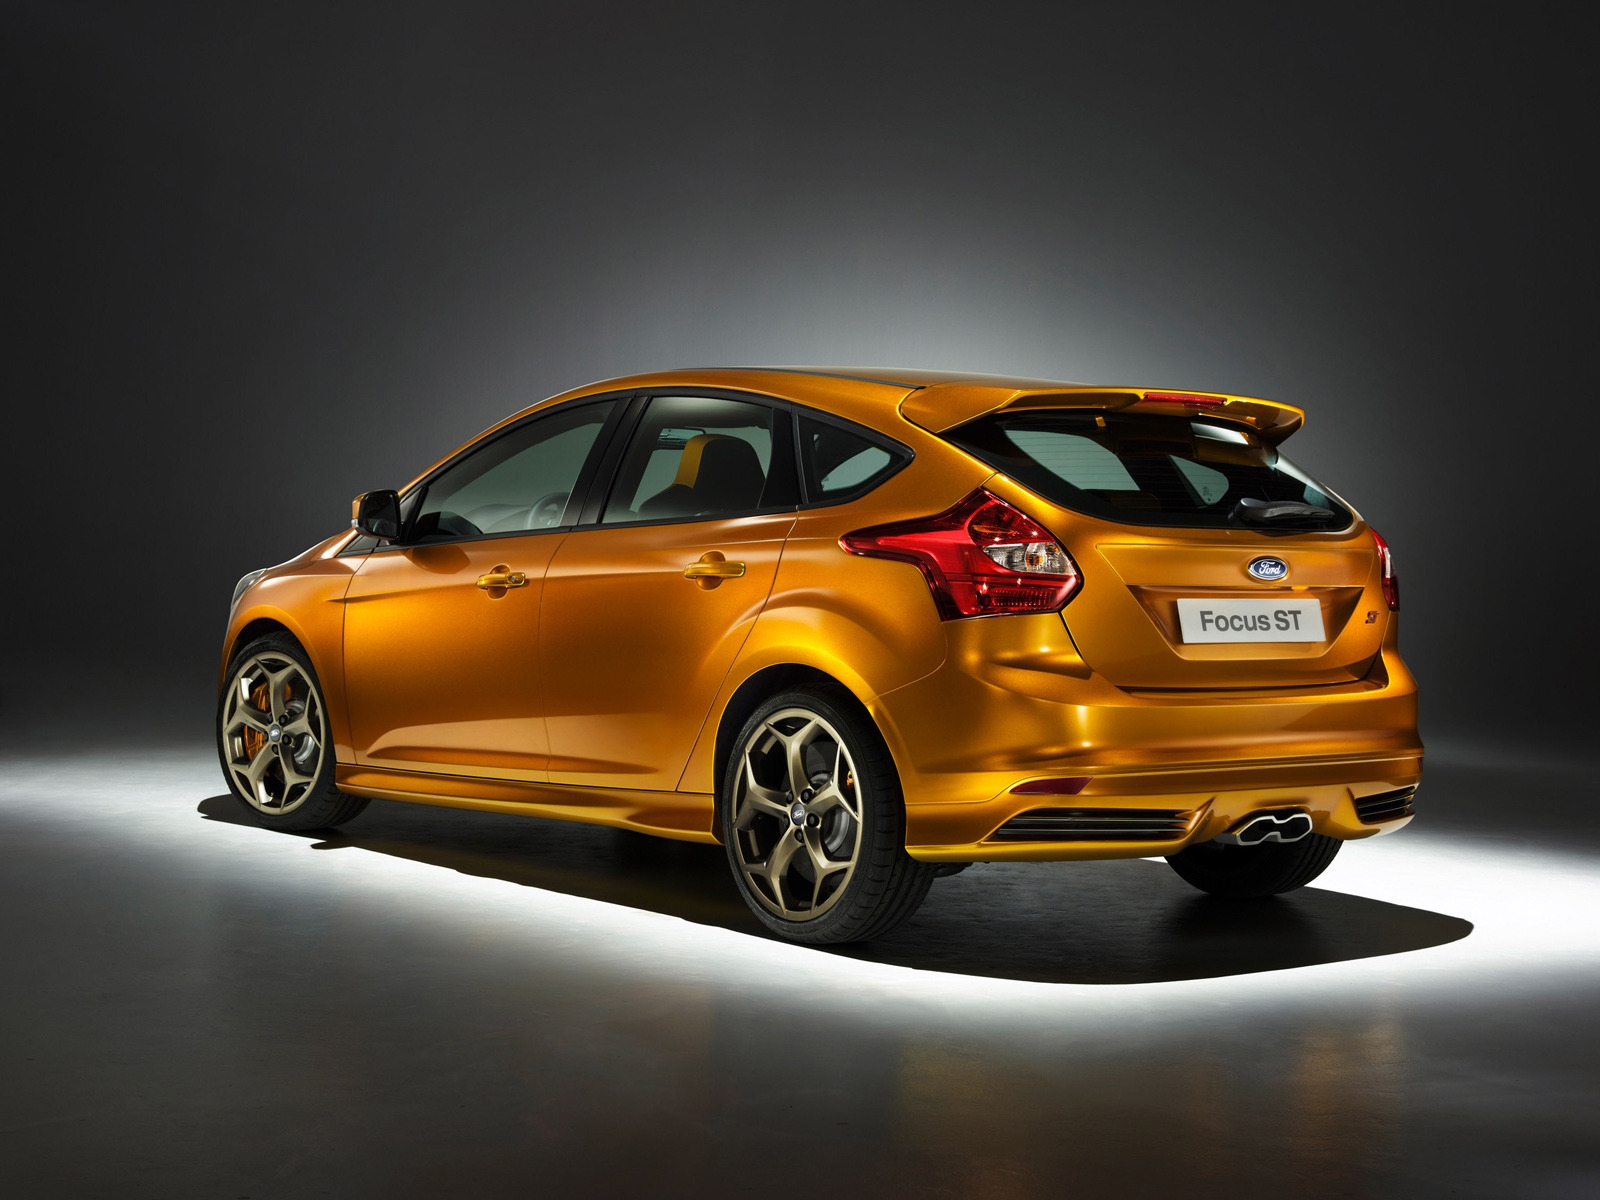 2012 Ford Focus ST for 1600 x 1200 resolution